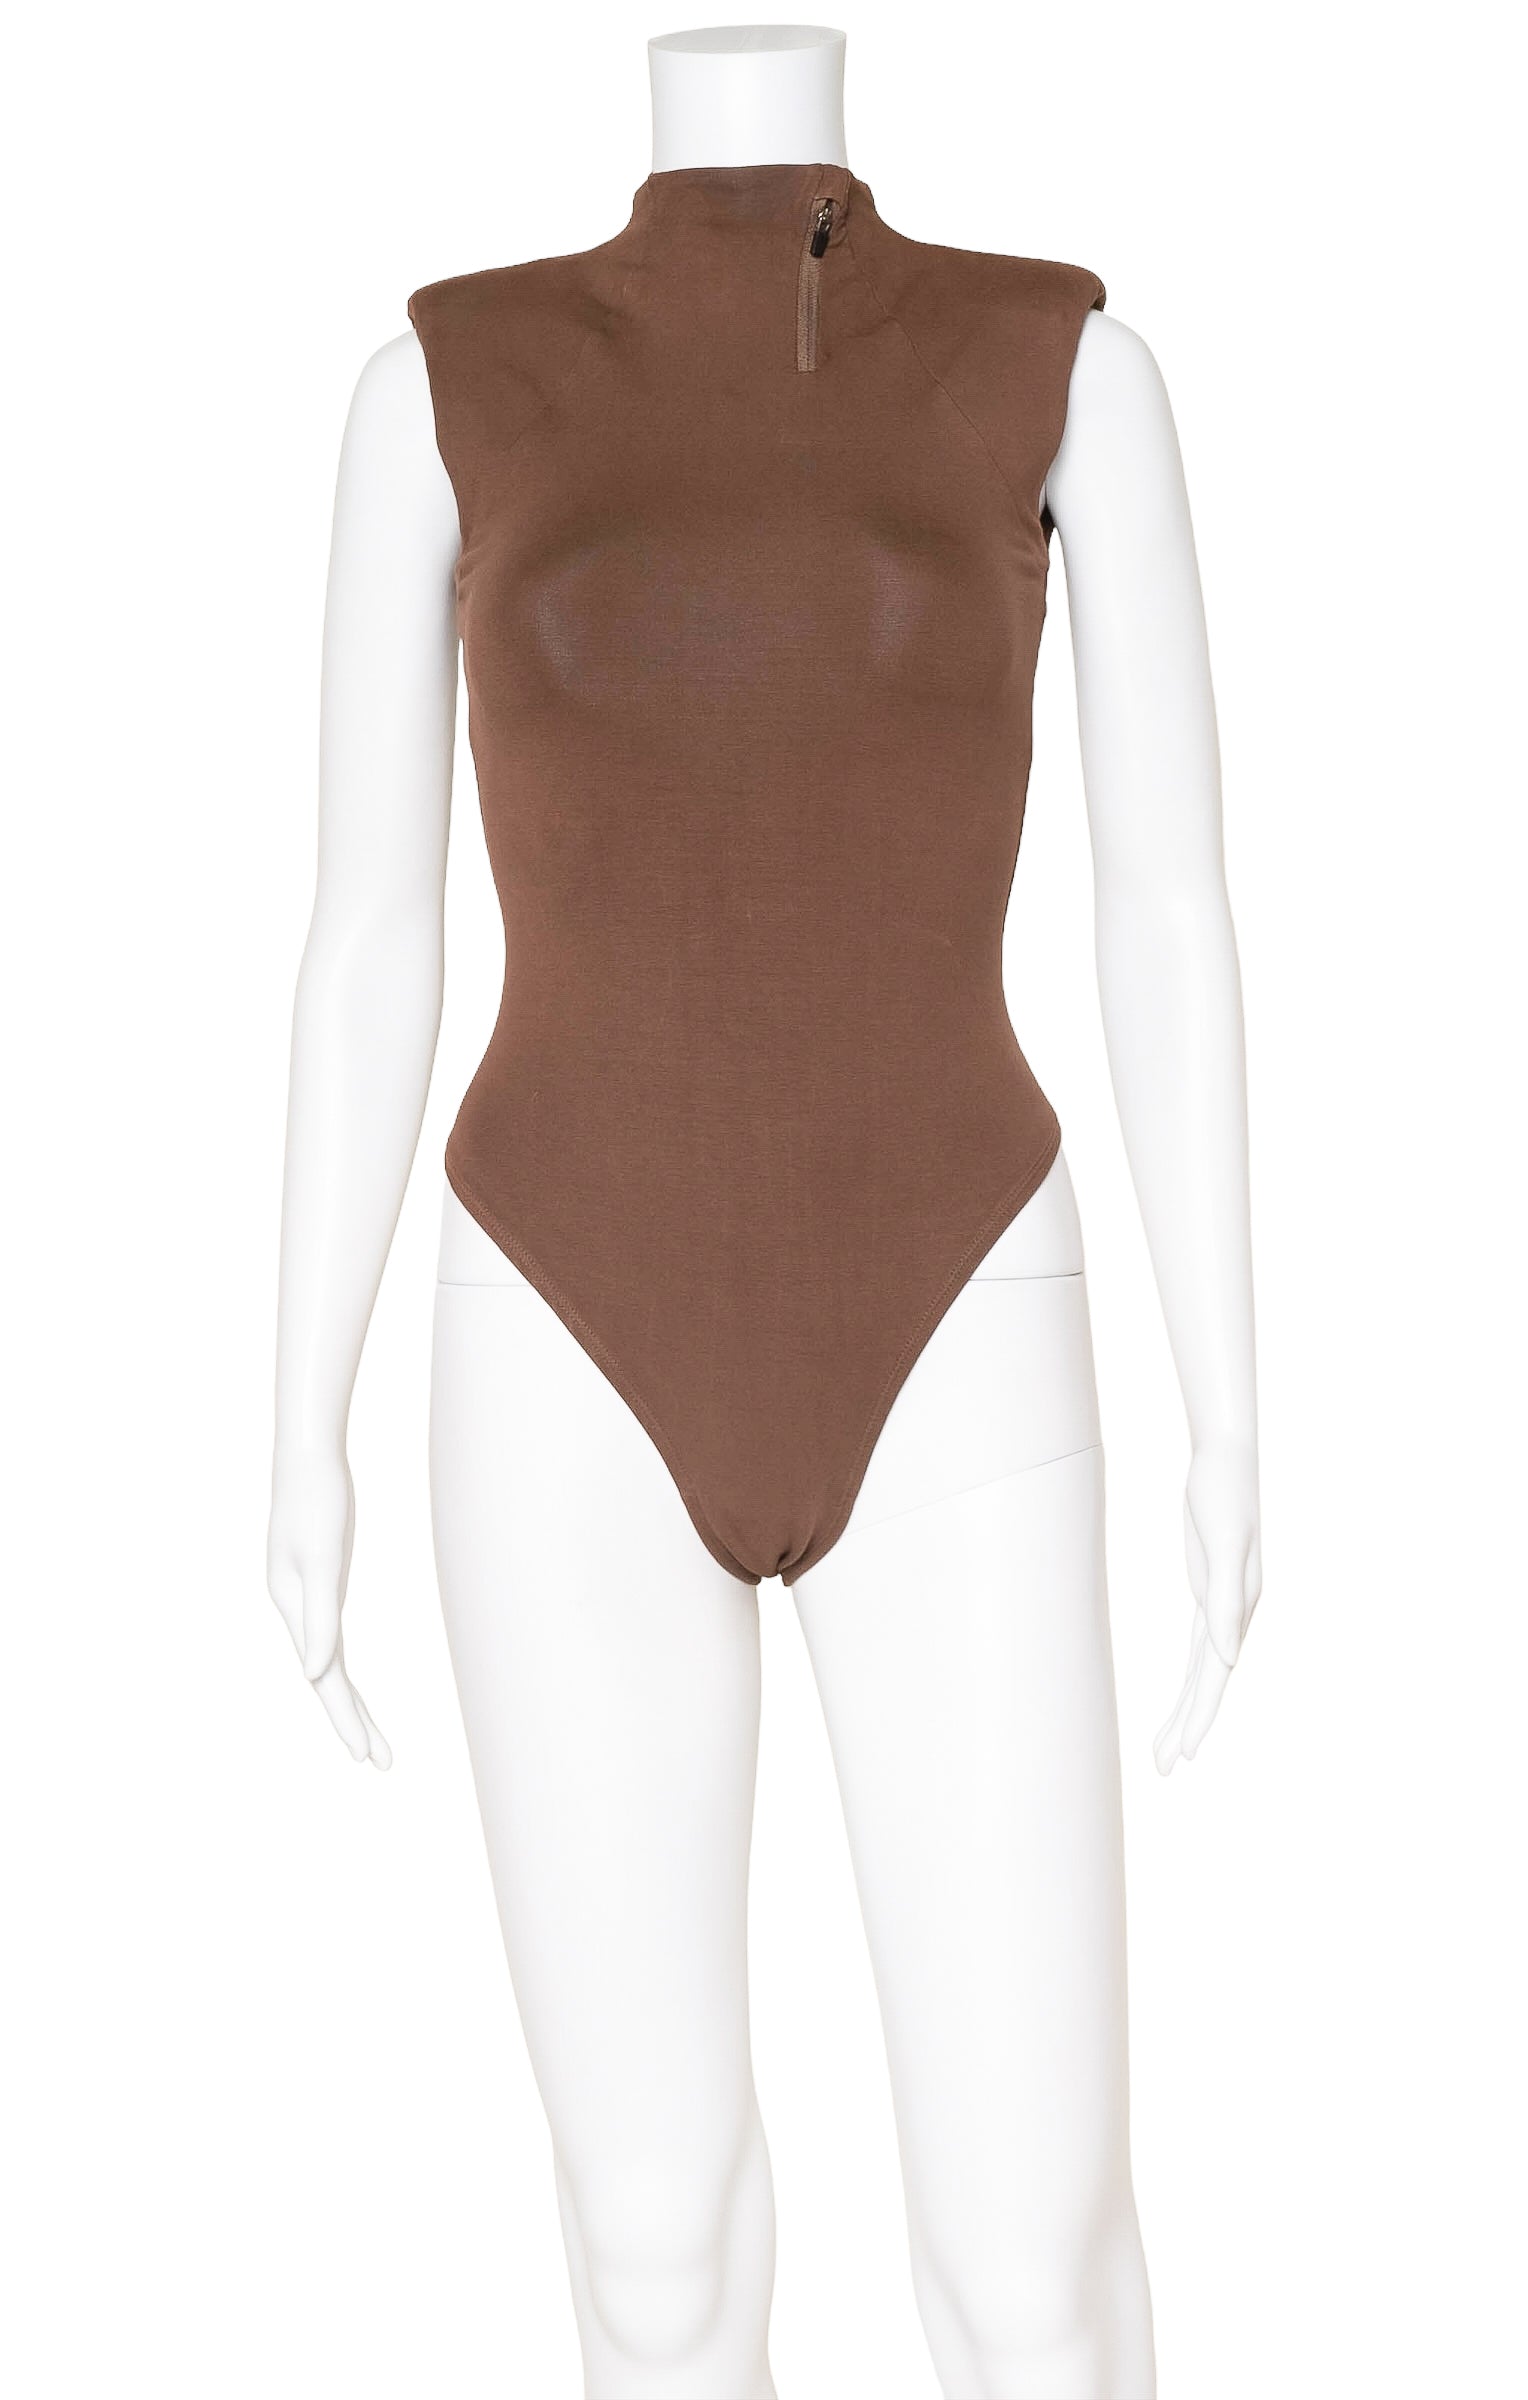 ENTIRE STUDIOS (RARE) Bodysuit Size: No size tags, fits like XS/S